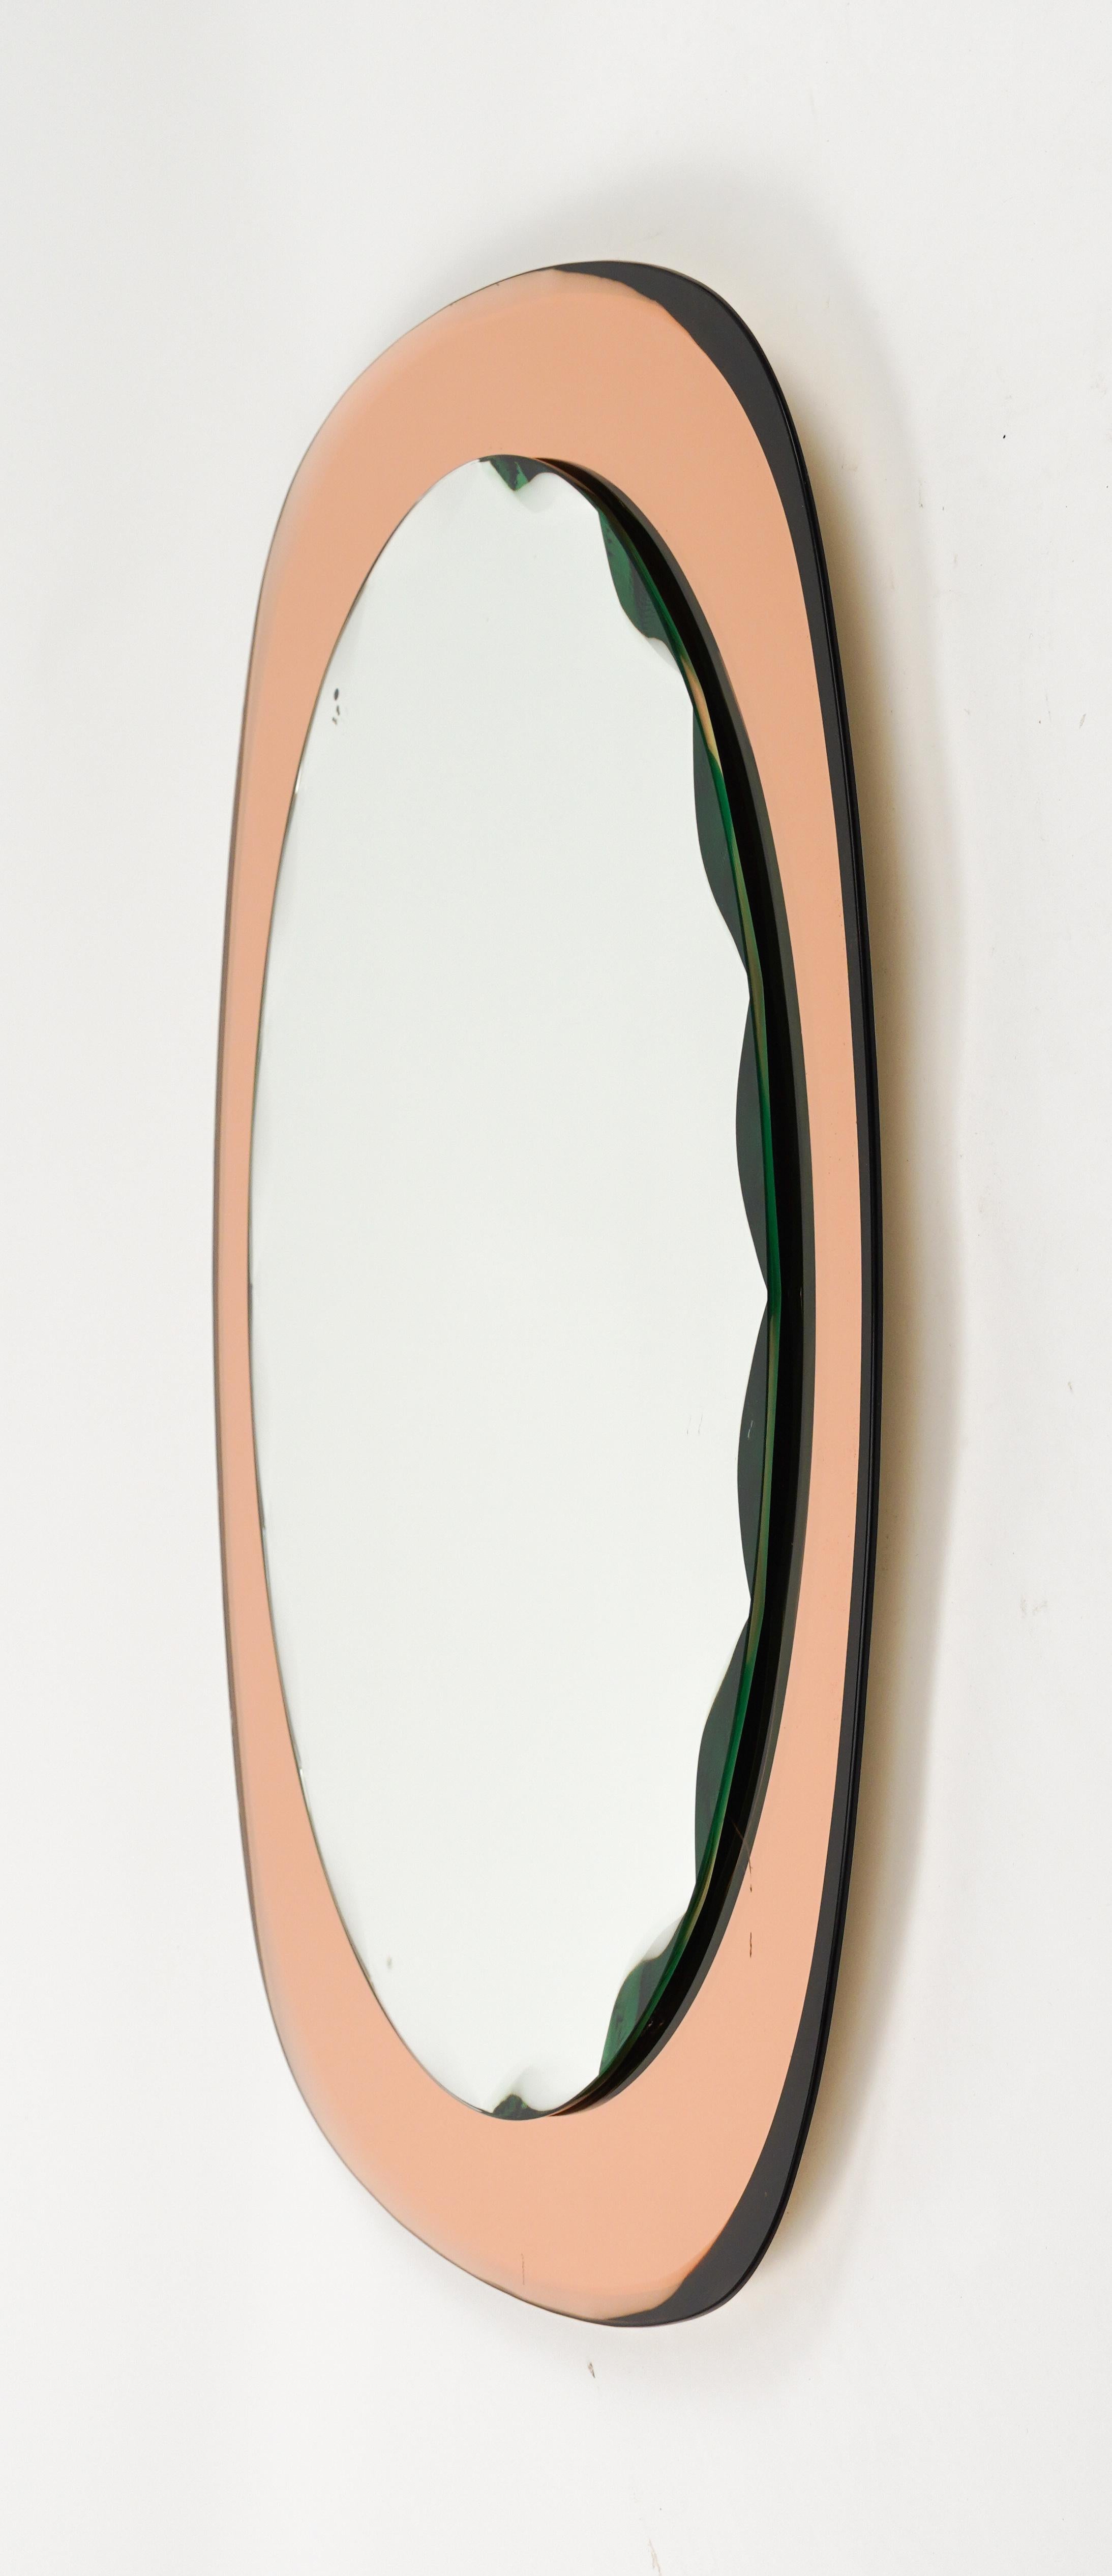 Midcentury Oval Wall Mirror rose gold Glass Frame by Cristal Arte, Italy 1960s For Sale 1